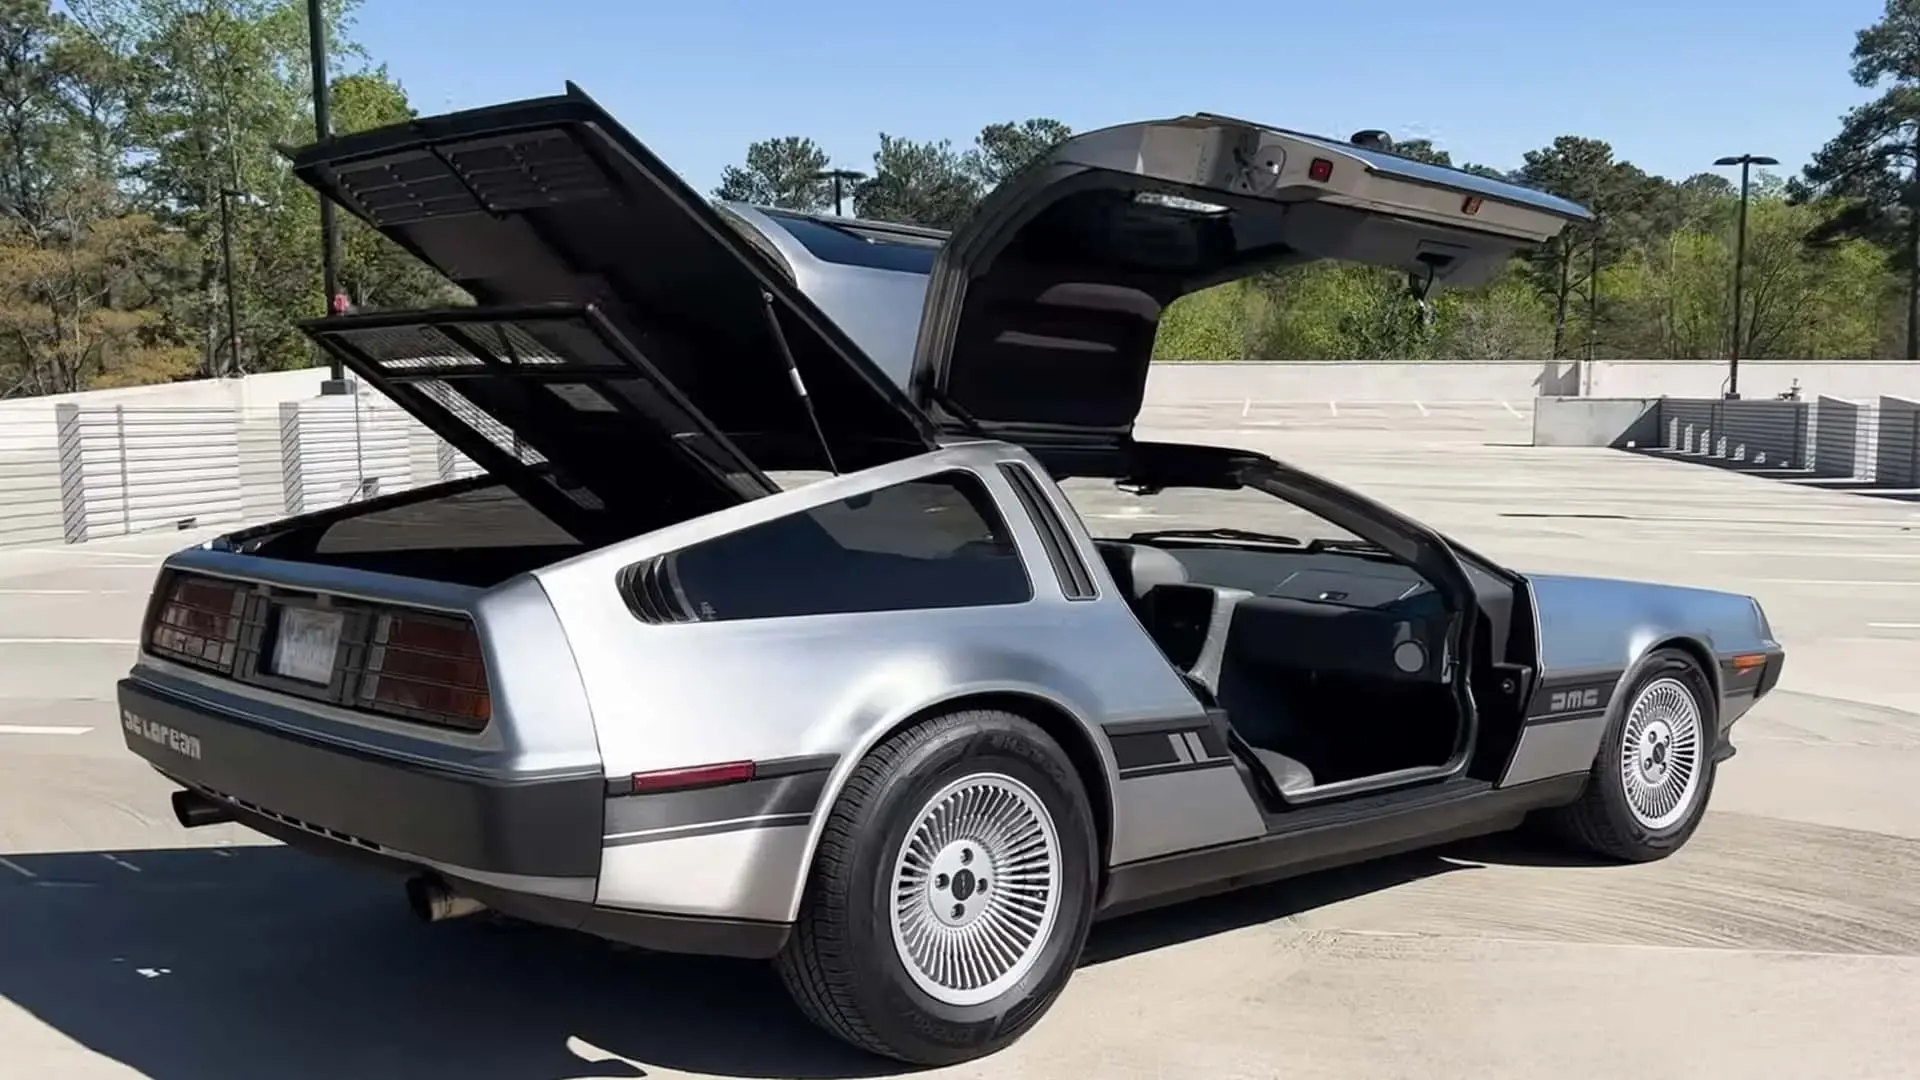 The DeLorean's most significant issue is resolved by the installation of a high-performance Honda engine